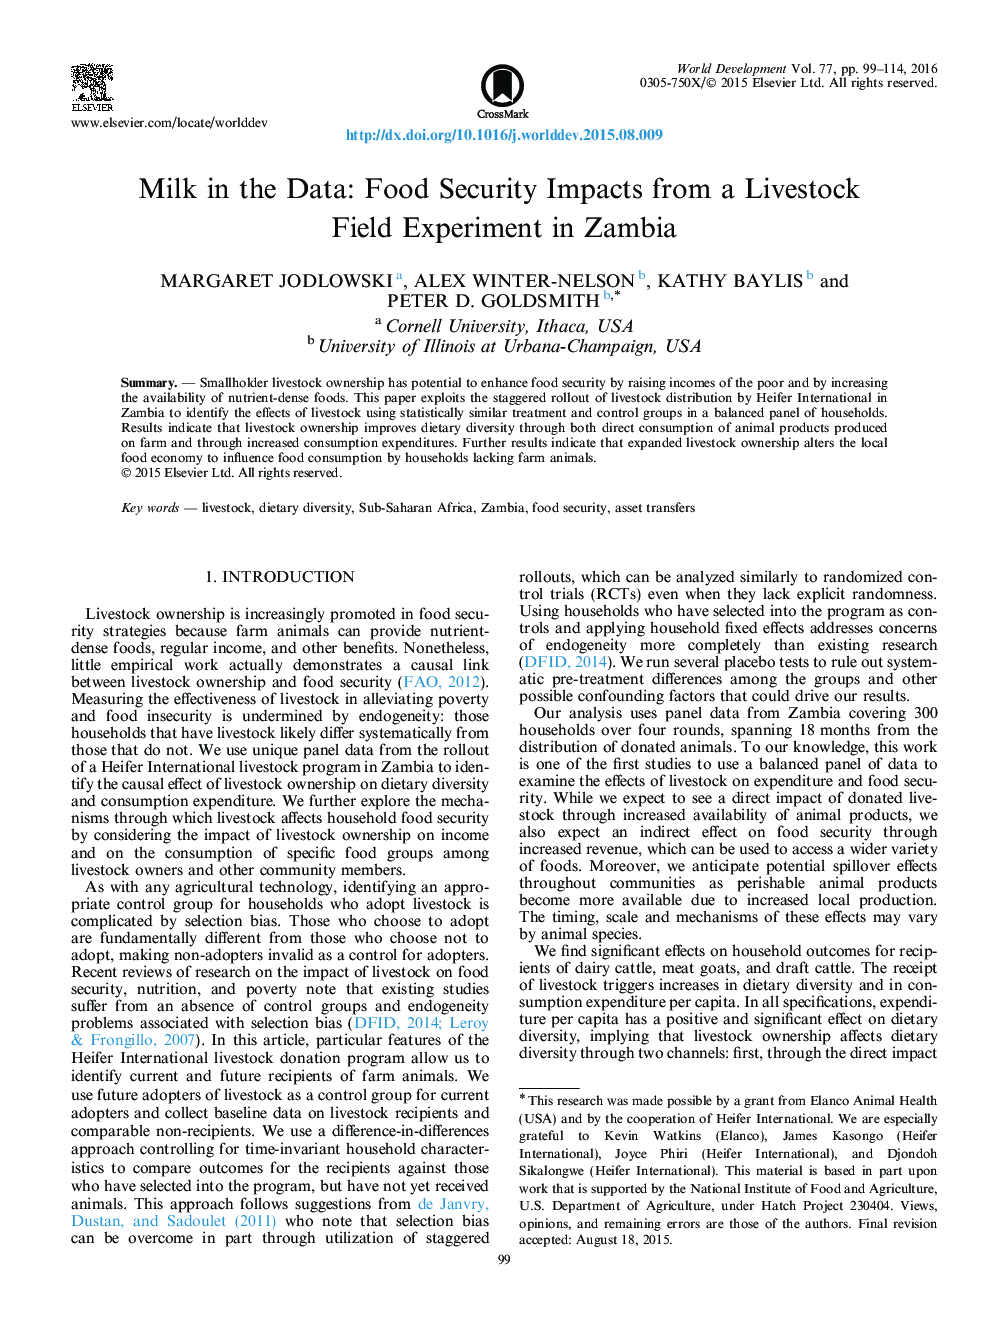 Milk in the Data: Food Security Impacts from a Livestock Field Experiment in Zambia